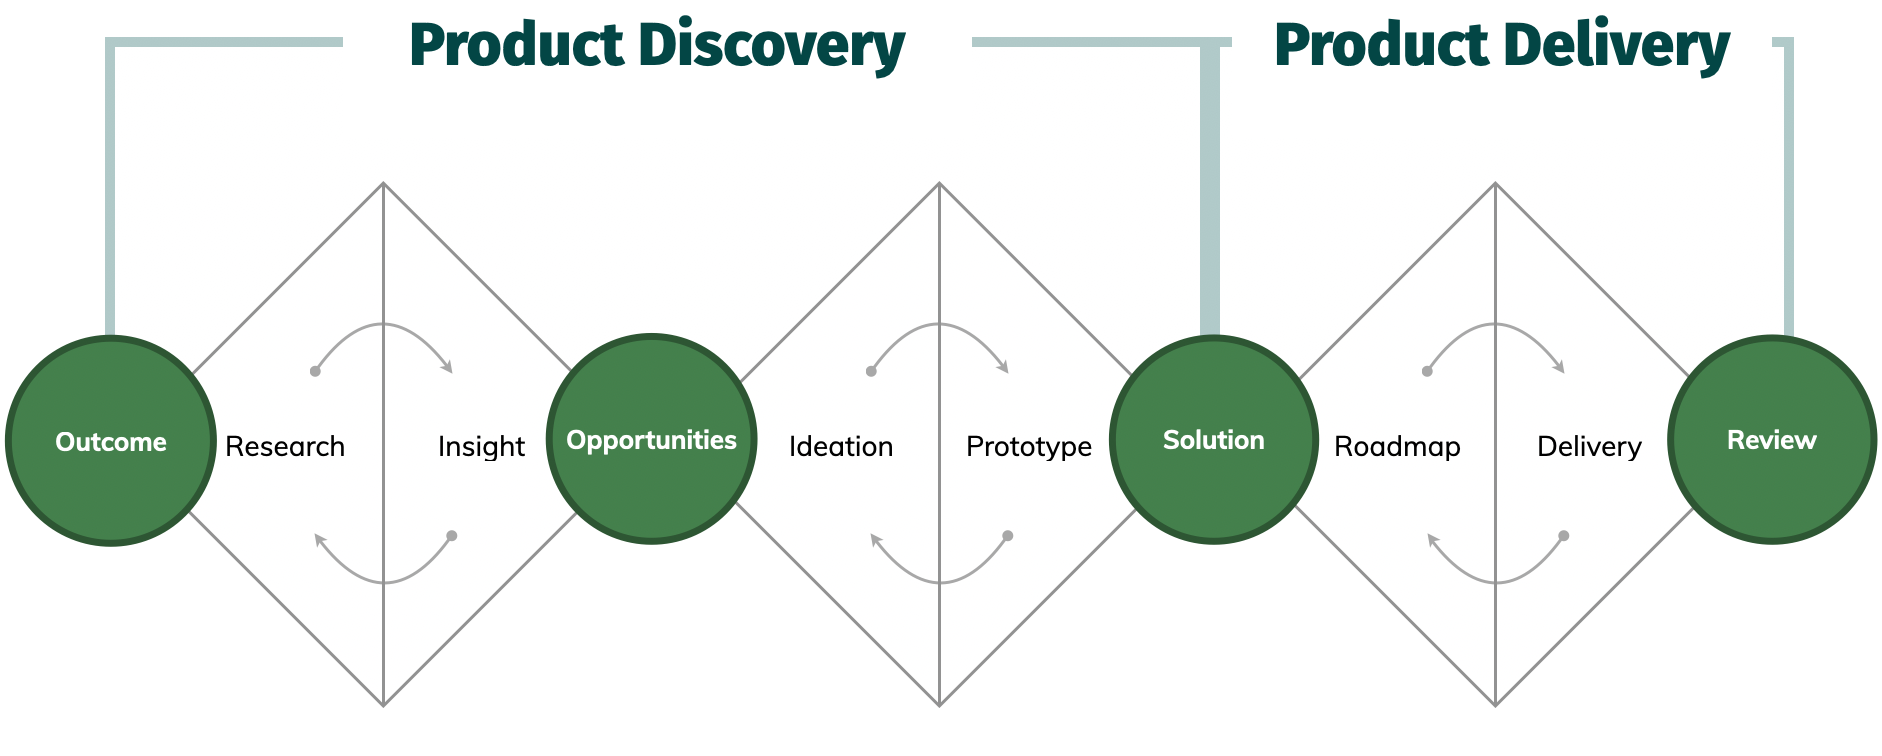 Product Discovery vs. Product Delivery